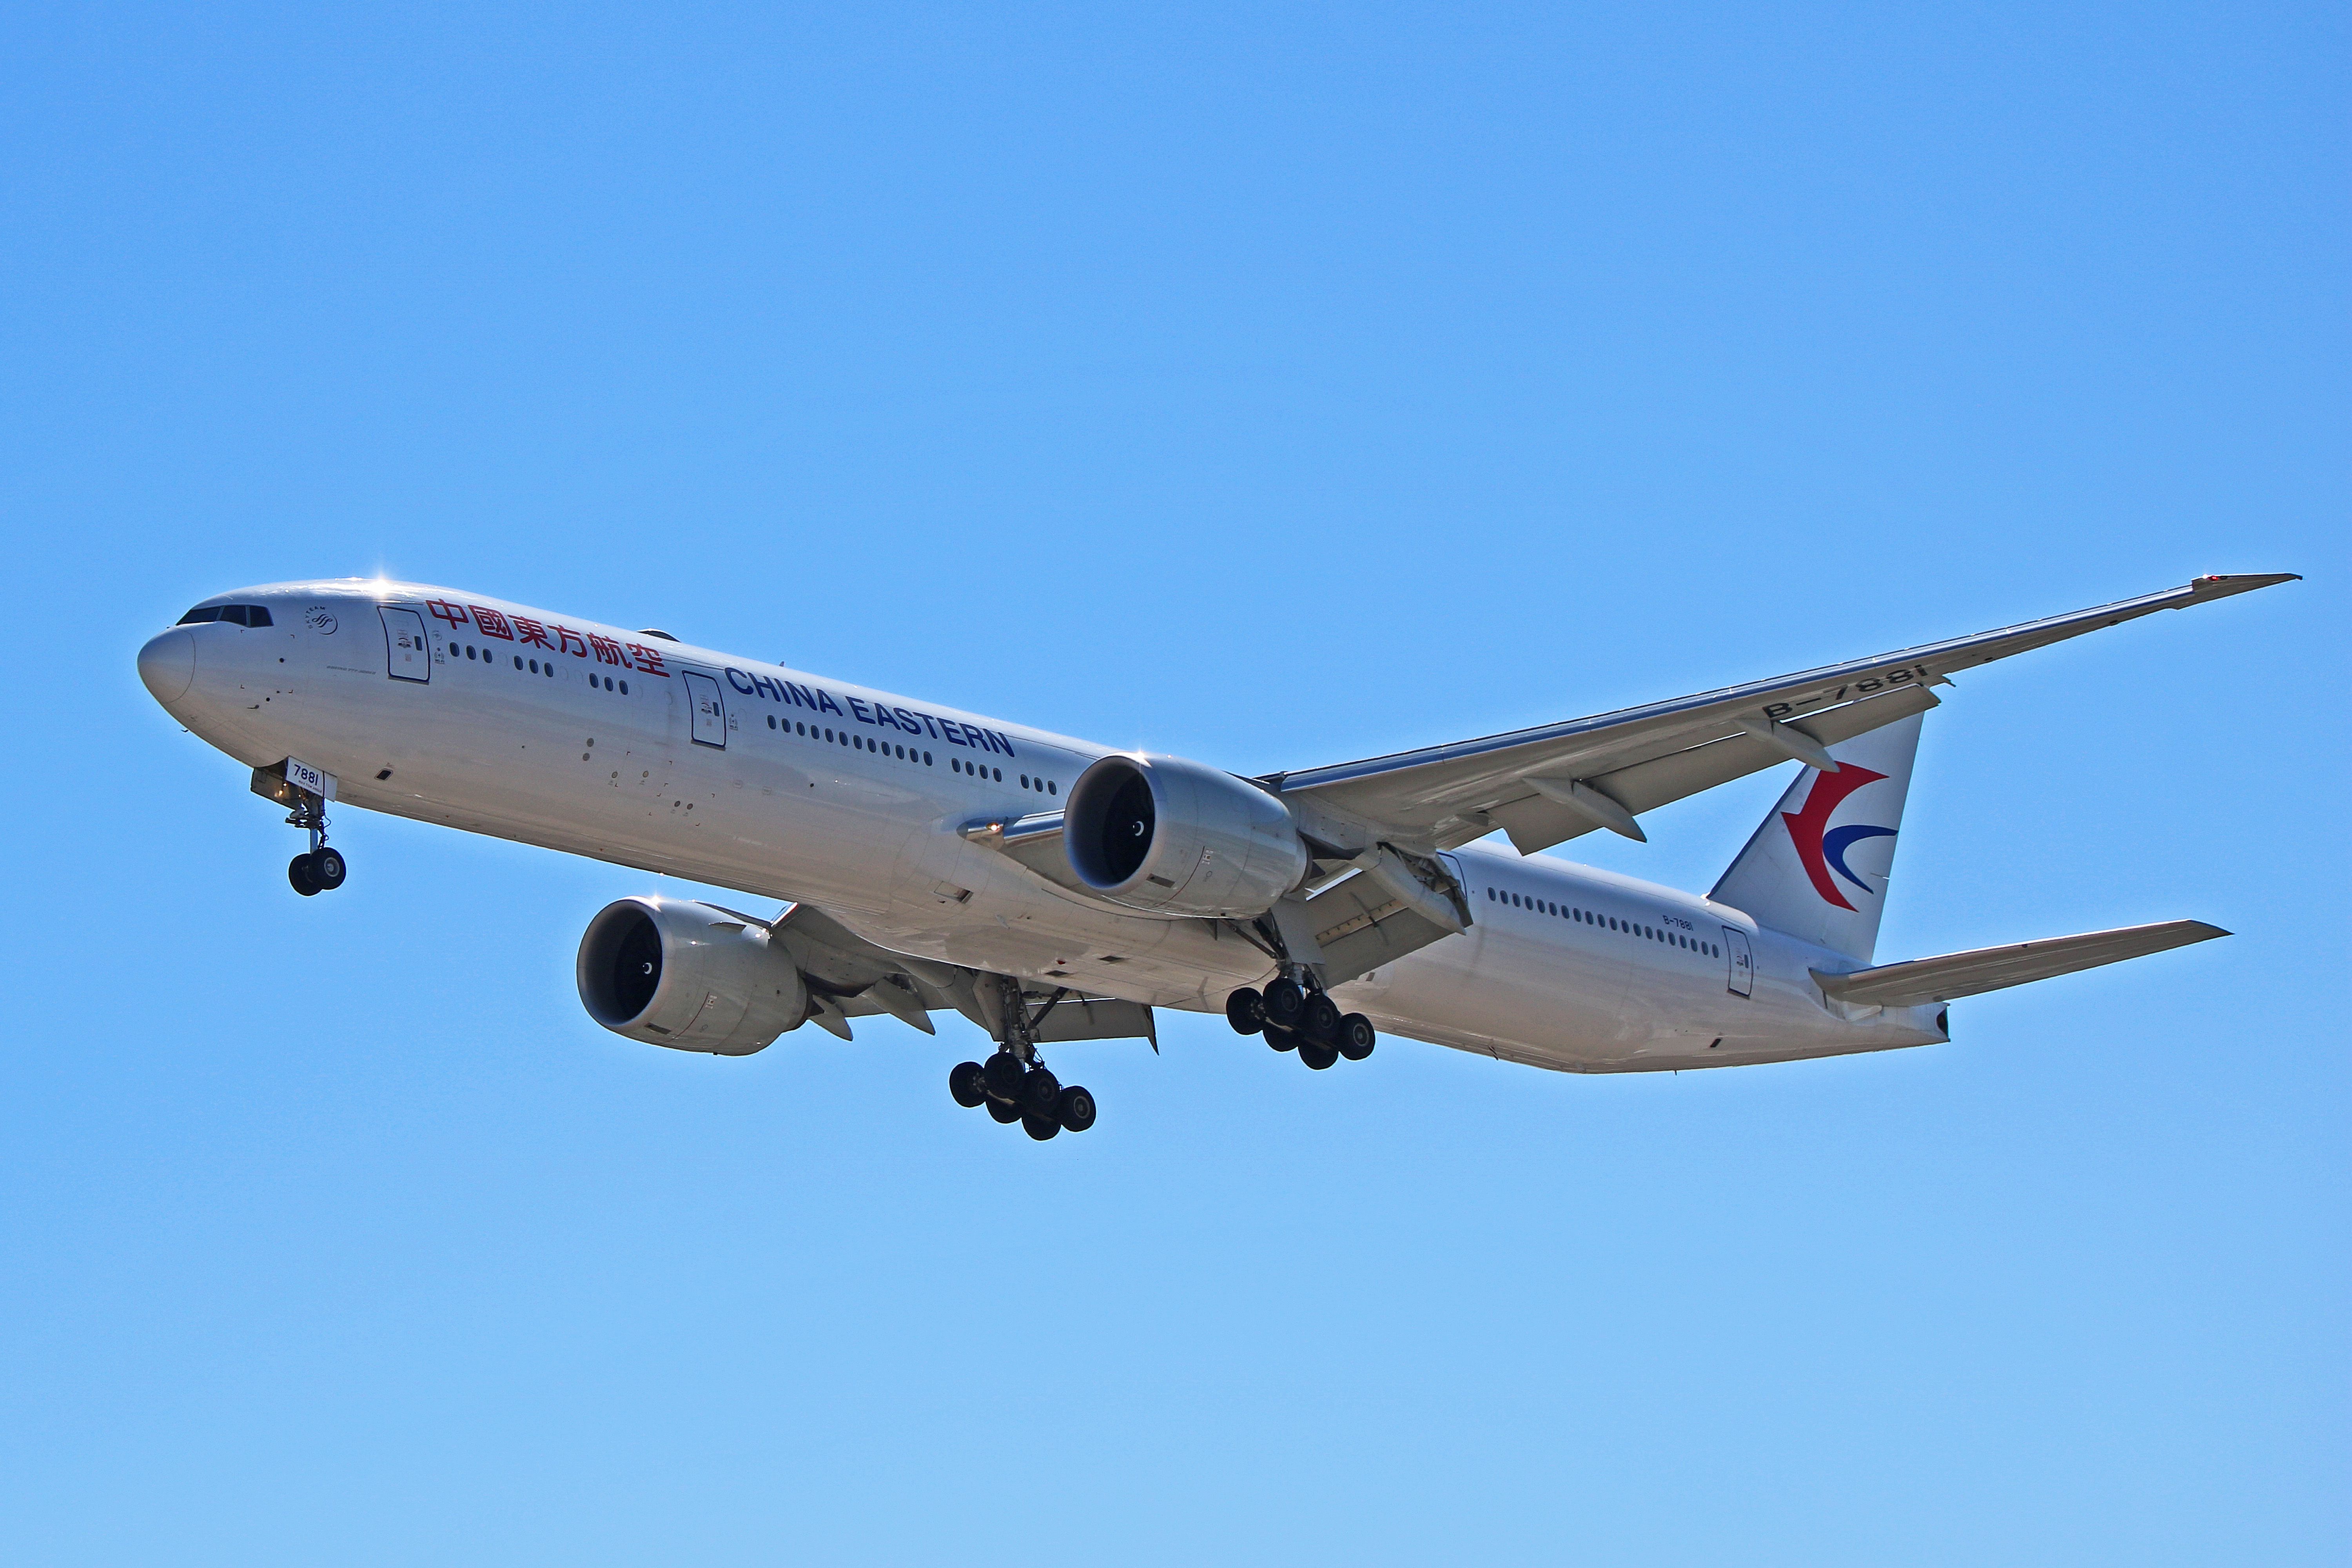 b-7881 china eastern airlines boeing 777-300er toronto pearson yyz